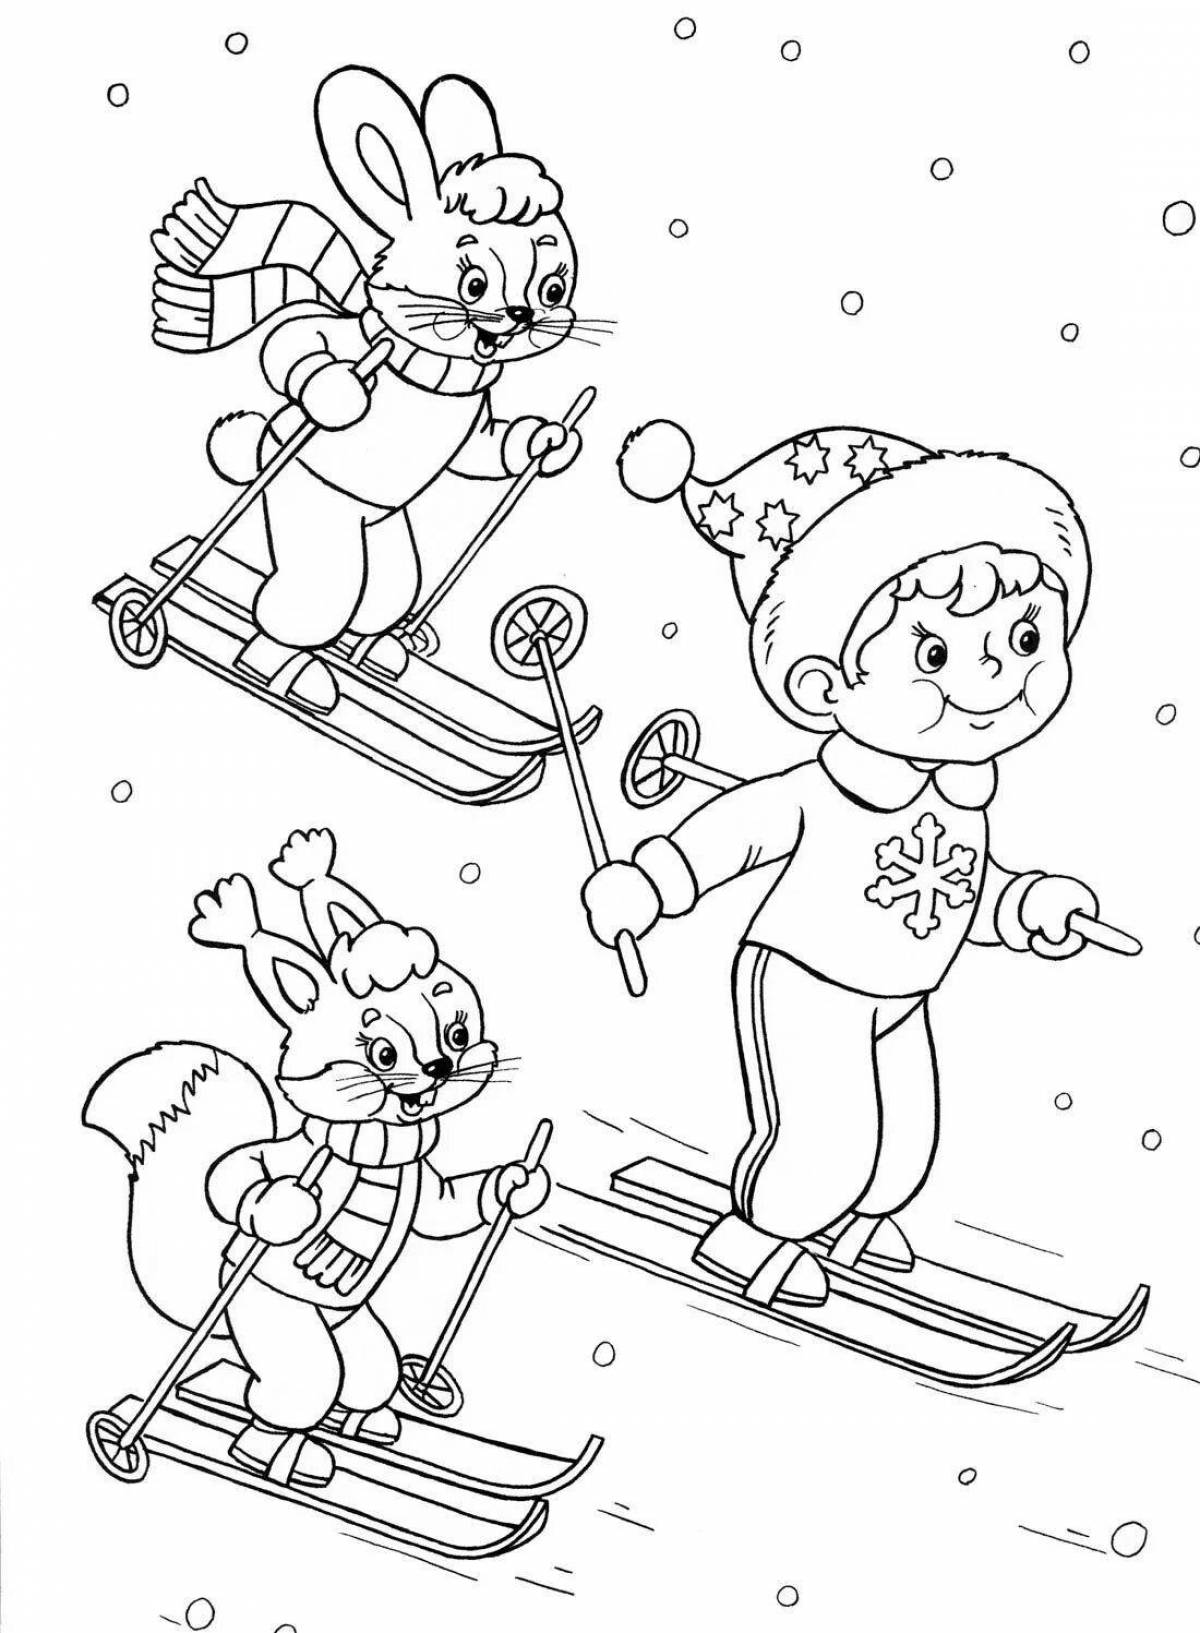 A fun skier coloring book for kids